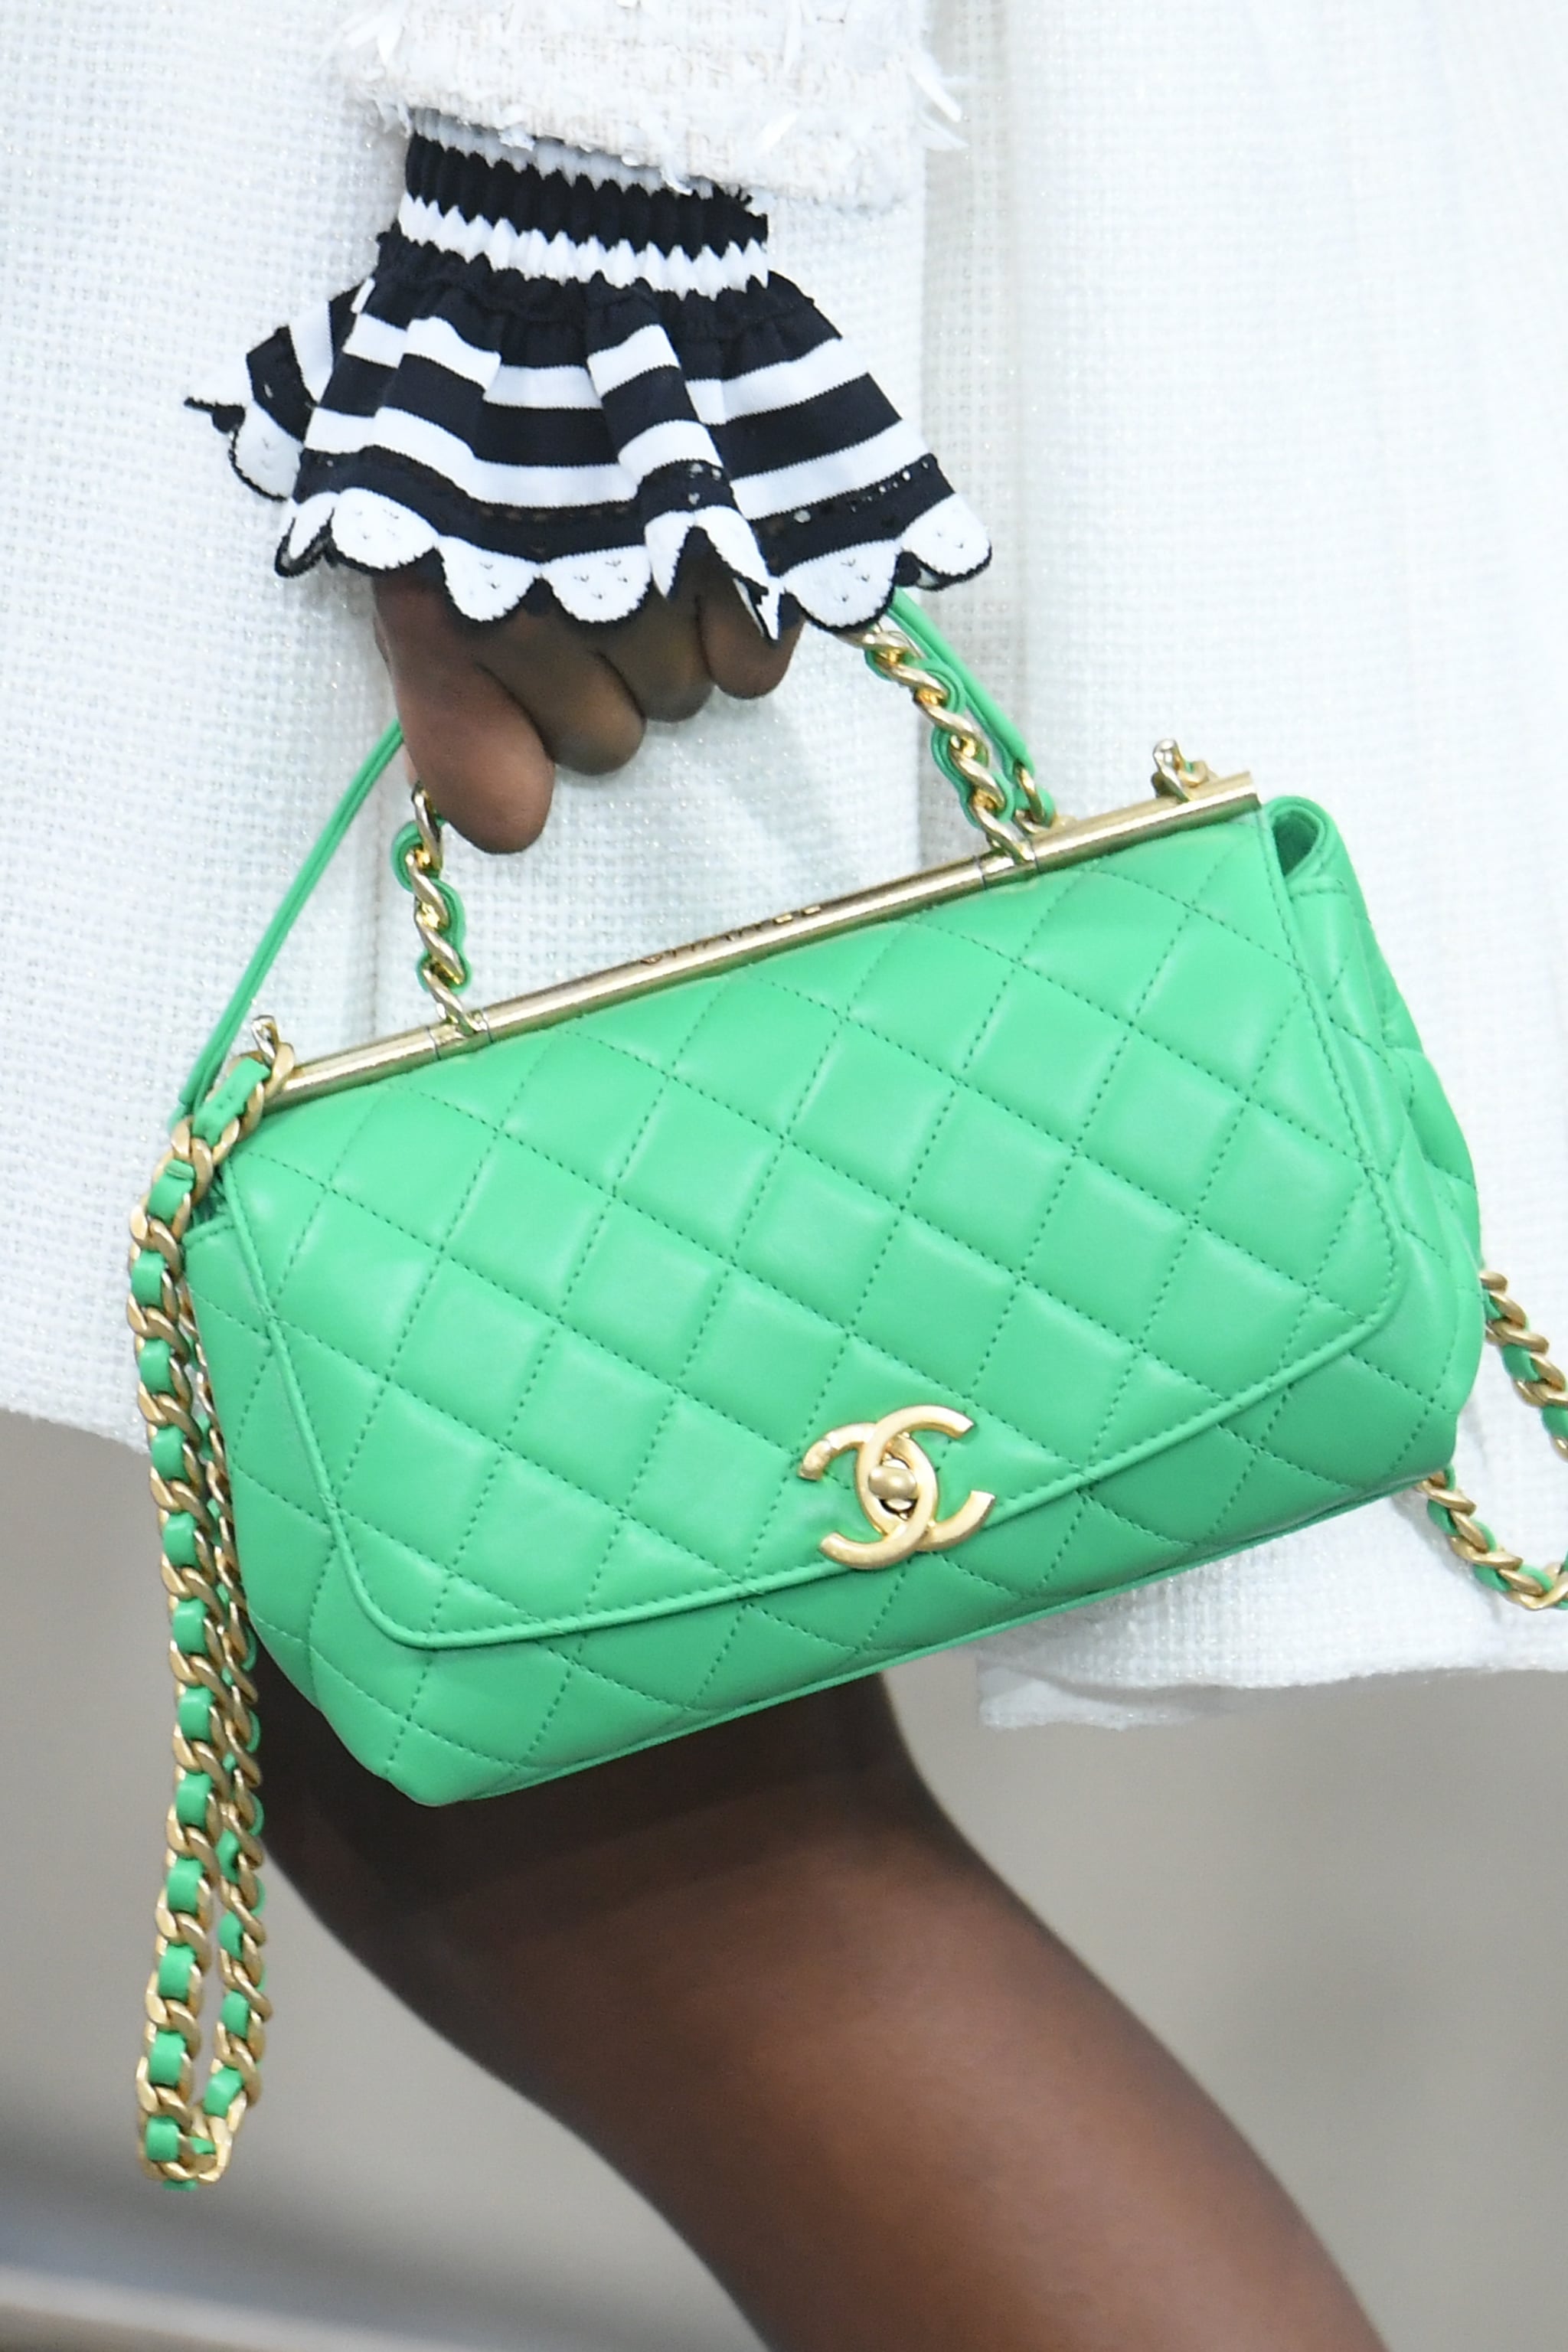 A Chanel Bag on the Runway During Paris Fashion Week, Chanel Just Gave Us  the Walkable Flats of Our Dreams (and a Neon Green Bag We Never Knew We  Needed)